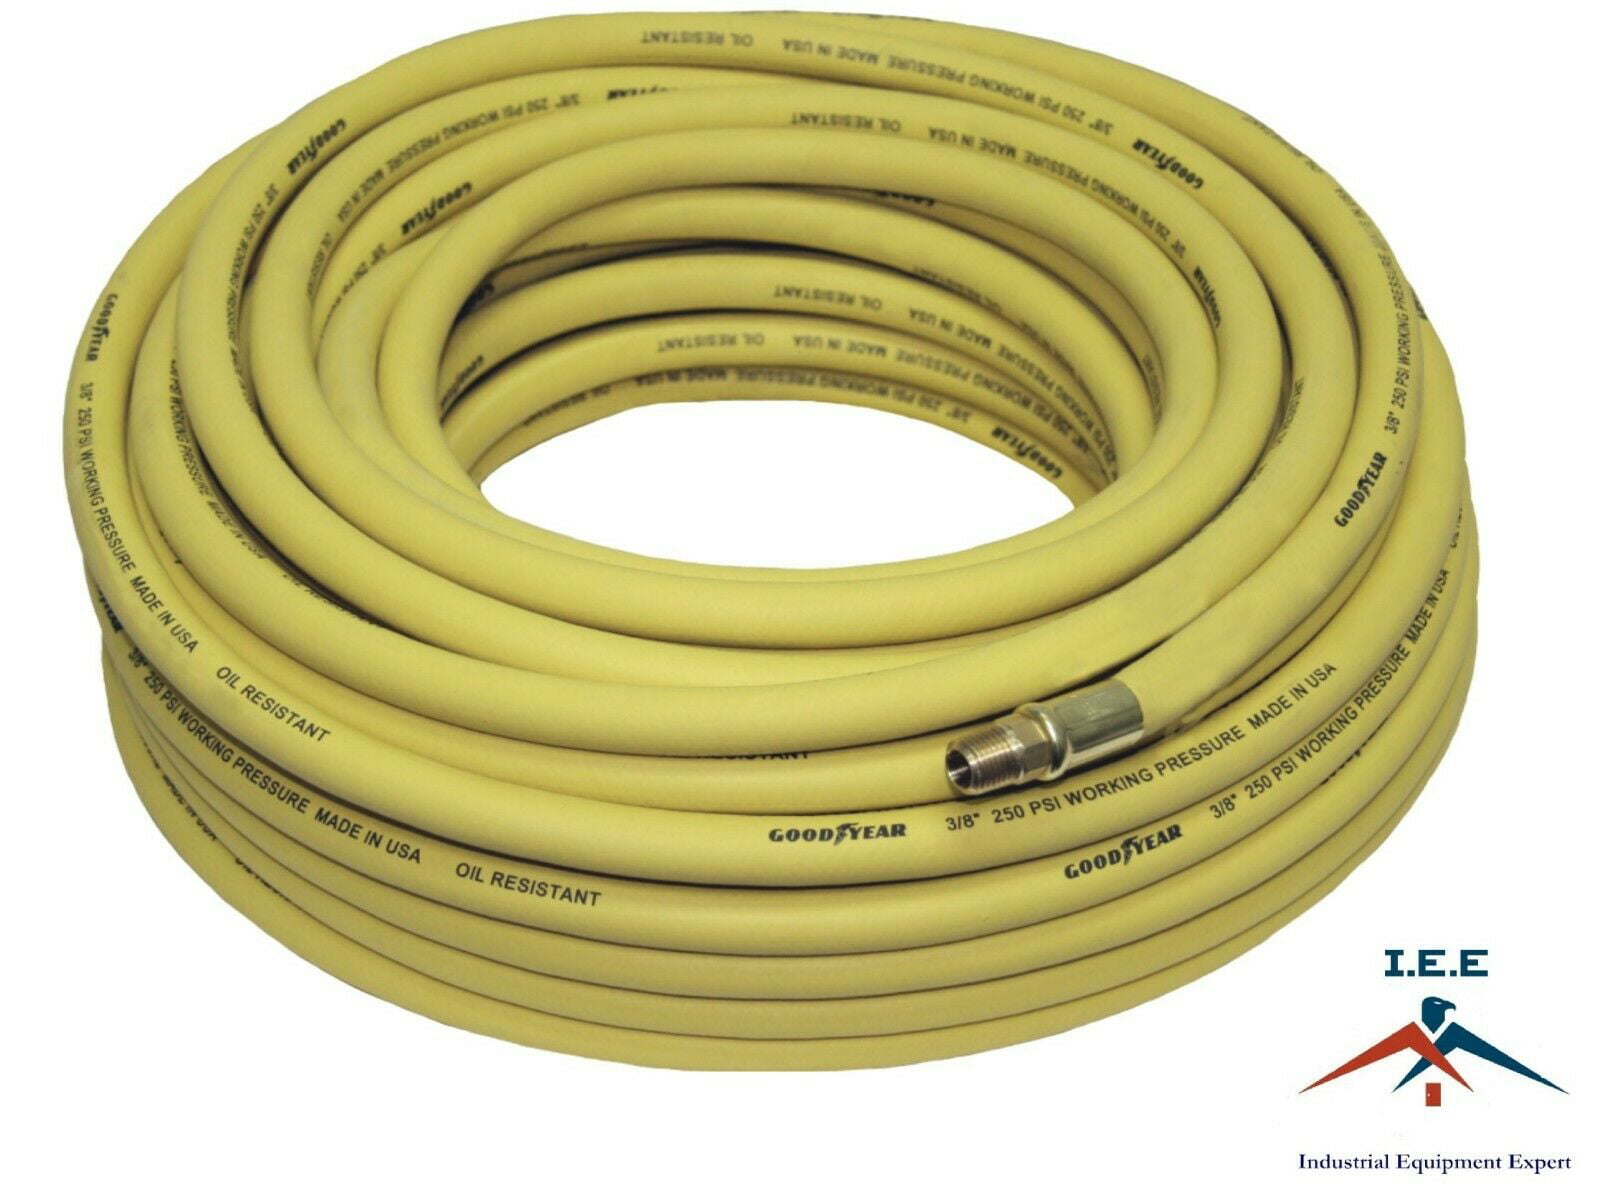 250 PSI Air Compressor Hose 12752 x 3/8" in Goodyear Rubber Air Hose 100' ft 